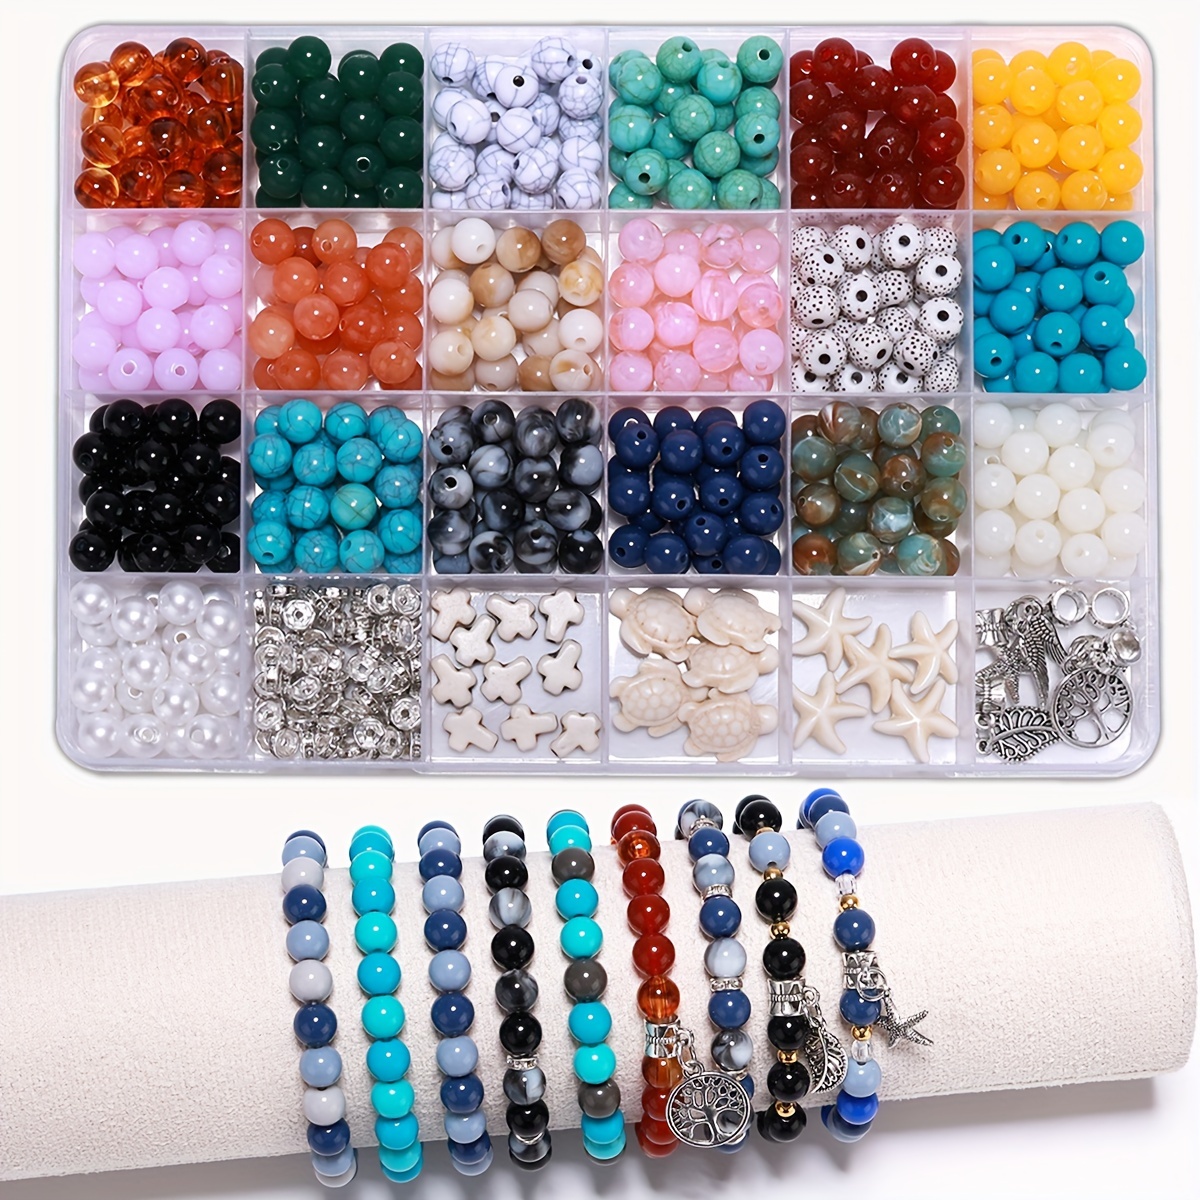  Beading Station 50pcs Mix Artistic New Marble Design Glass  Round Beads 8mm ~Jewelry Findings~ Free Handcrafted Pendant(1) : Arts,  Crafts & Sewing